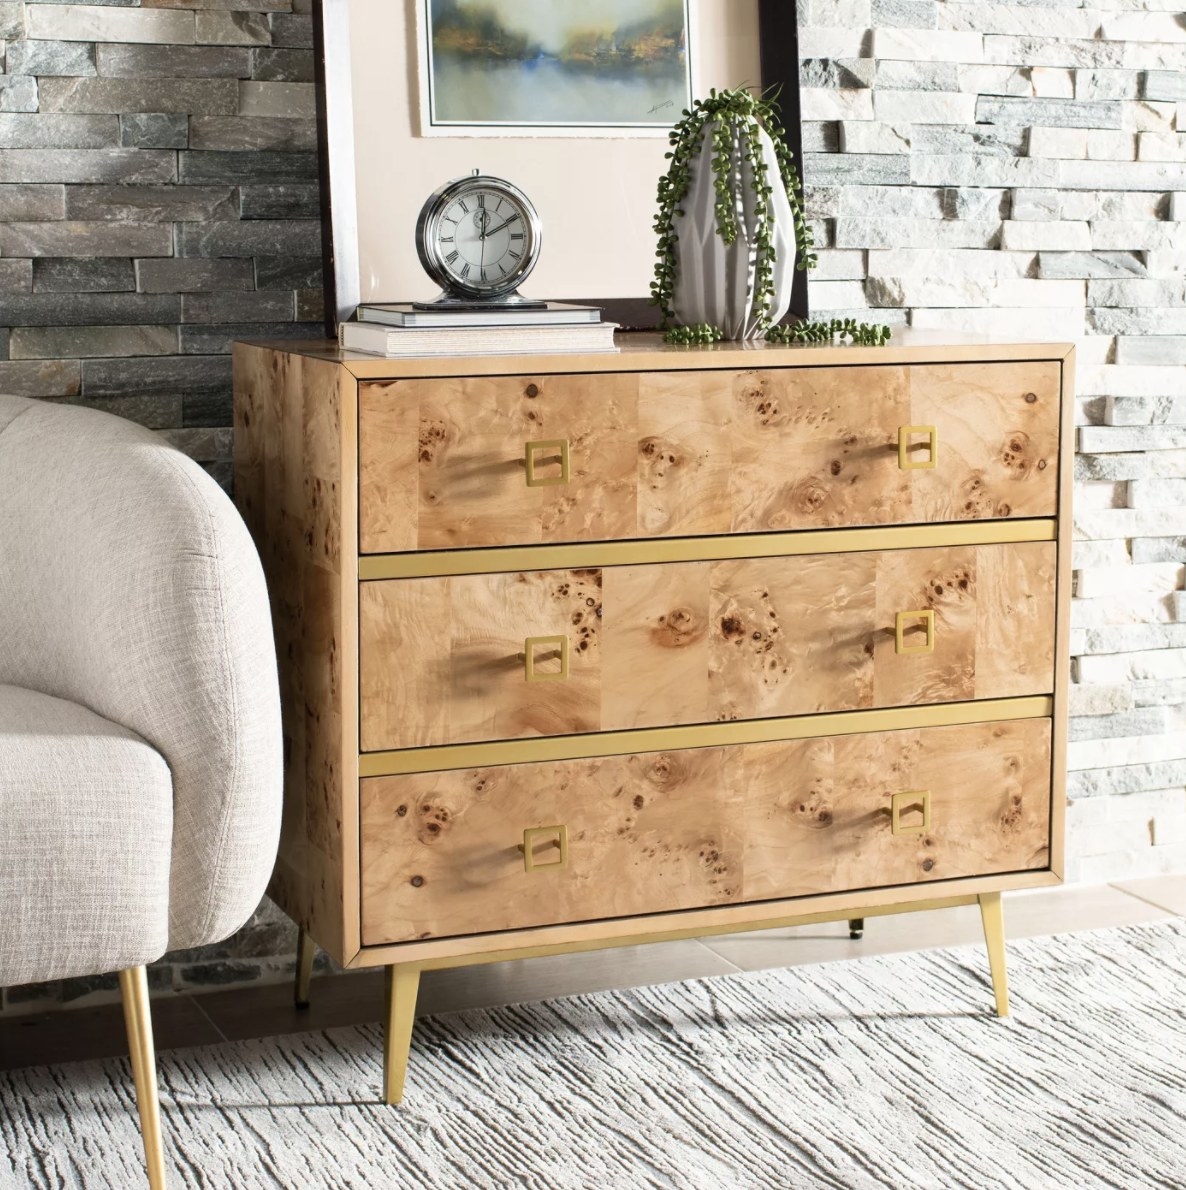 A light brown dresser with gold handles and detailing in a gray room